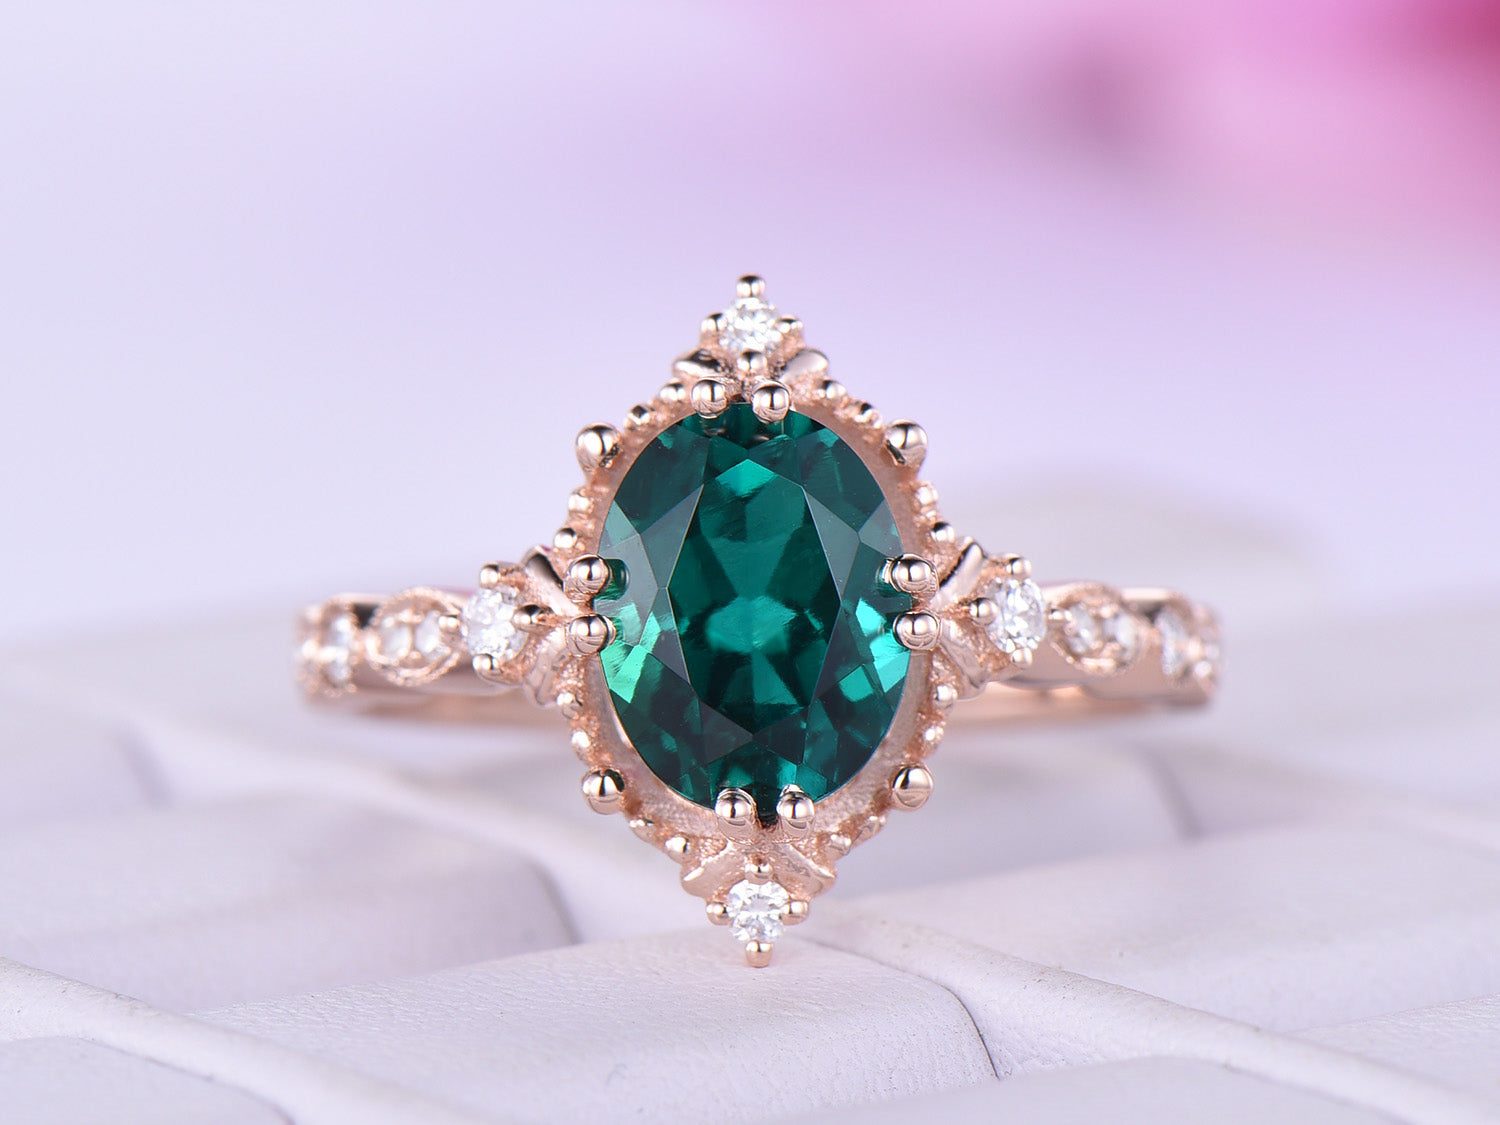 Vintage Style Oval Emerald Diamond Engagement Ring